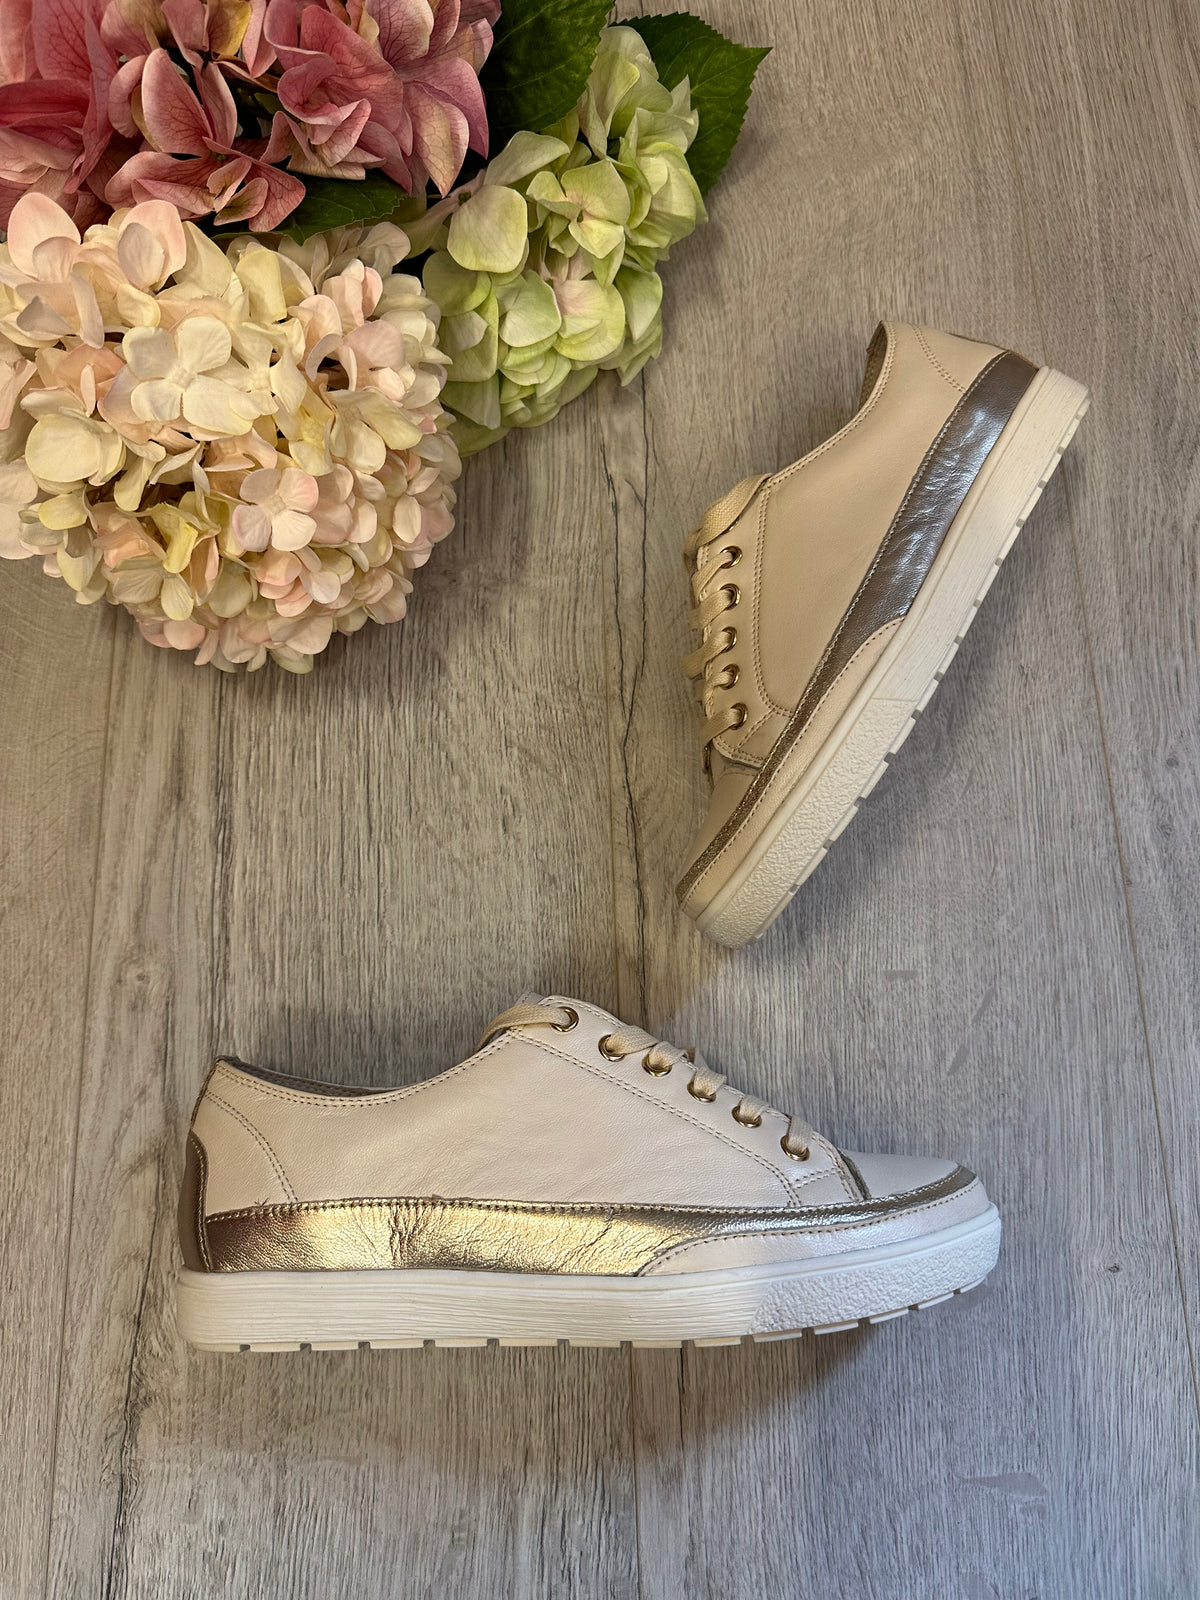 Caprice Leather Trainers In Cream/Gold